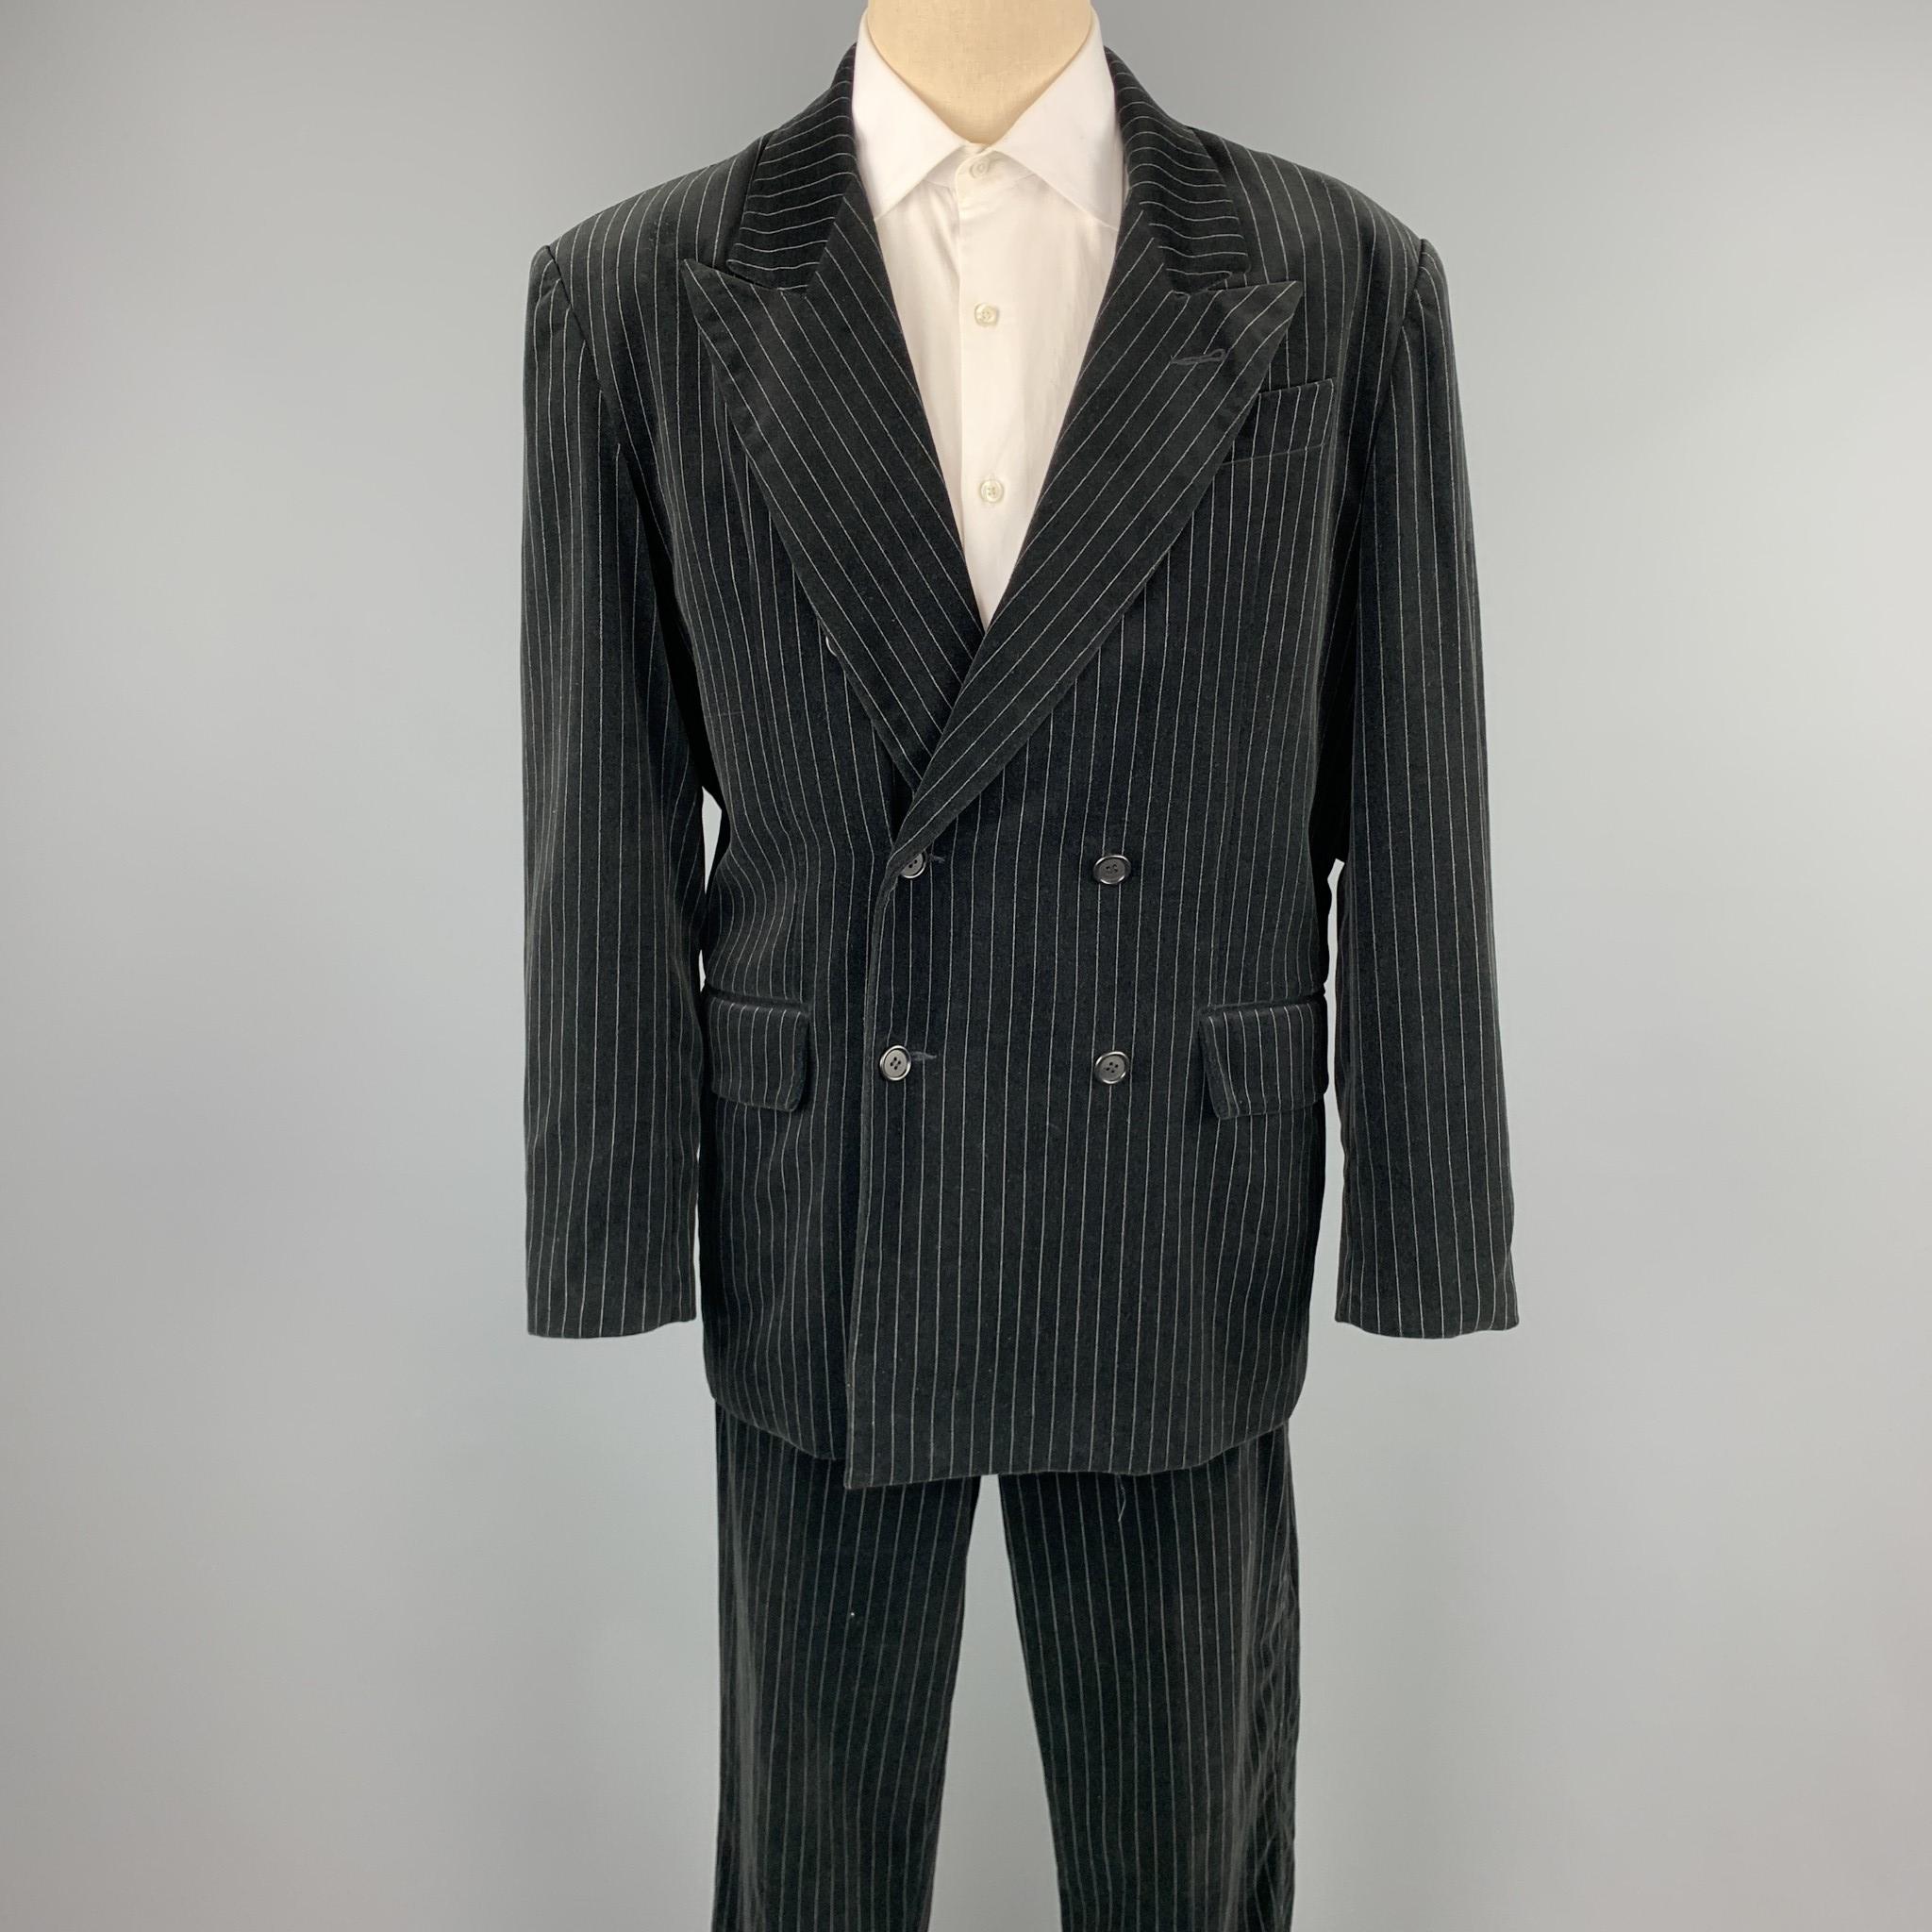 GASPAR SALDANHA suit comes in a black stripe velvet and includes a double breasted breasted button sport coat with a peak lapel and matching flat front trousers. Made in USA.

Very Good Pre-Owned Condition.
Marked: